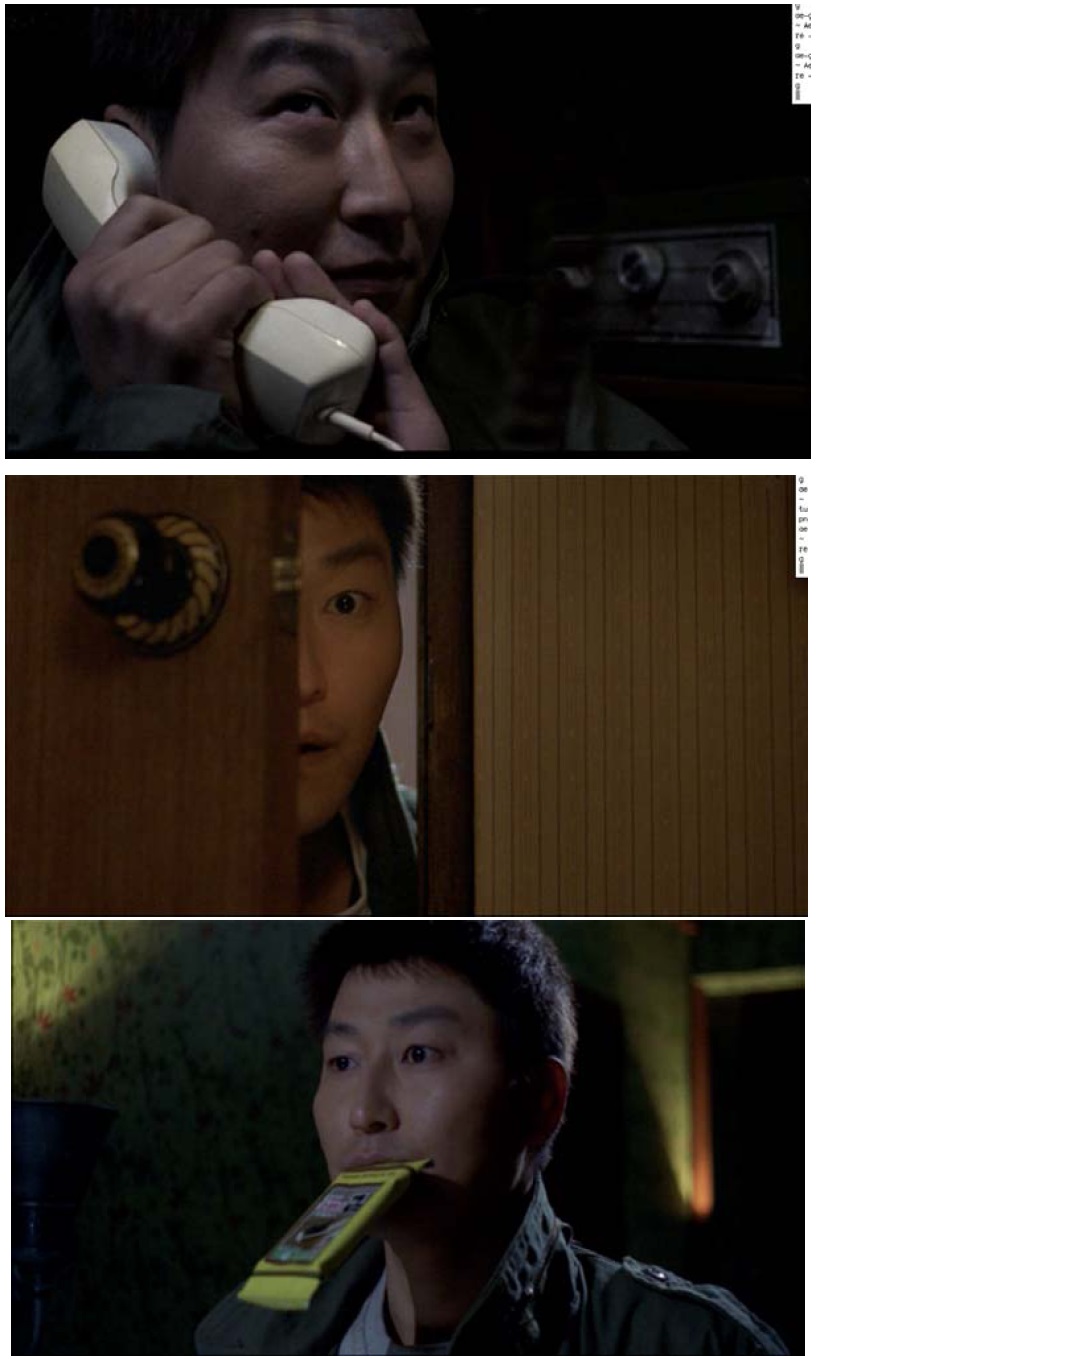 Film stills from the DVD The Quiet Family (1998, Myung Film Company). Top and middle: Young-min spying on hotel guests; bottom: Young-min delivering room service.